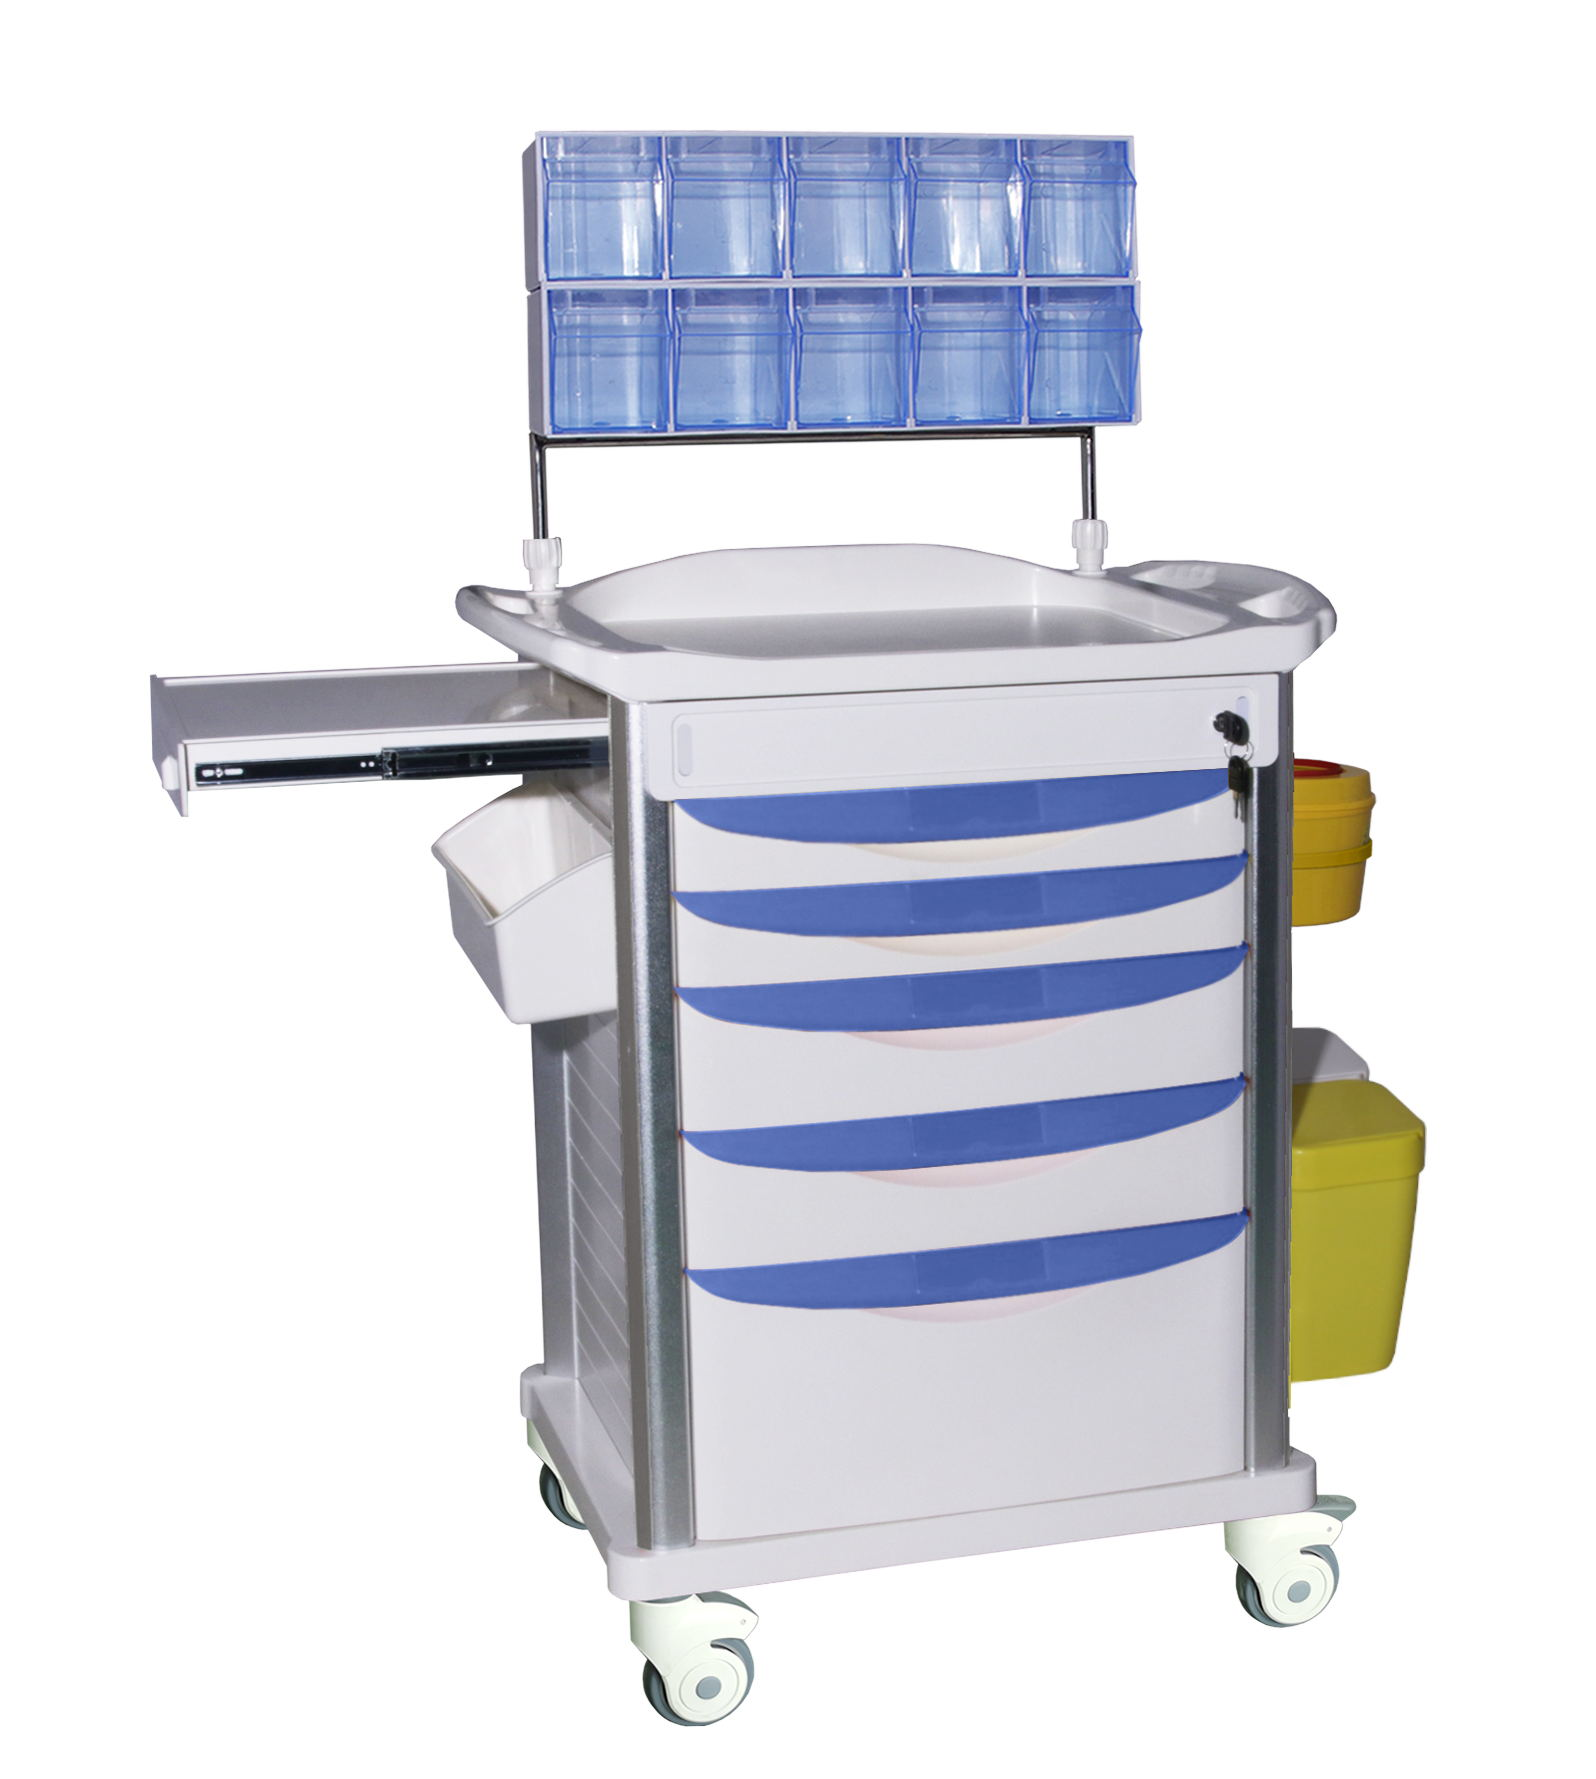 Hot sales ABS Plastic Anesthesia Emergency Treatment Trolley Medicine Anesthesia Trolley Medical Cart